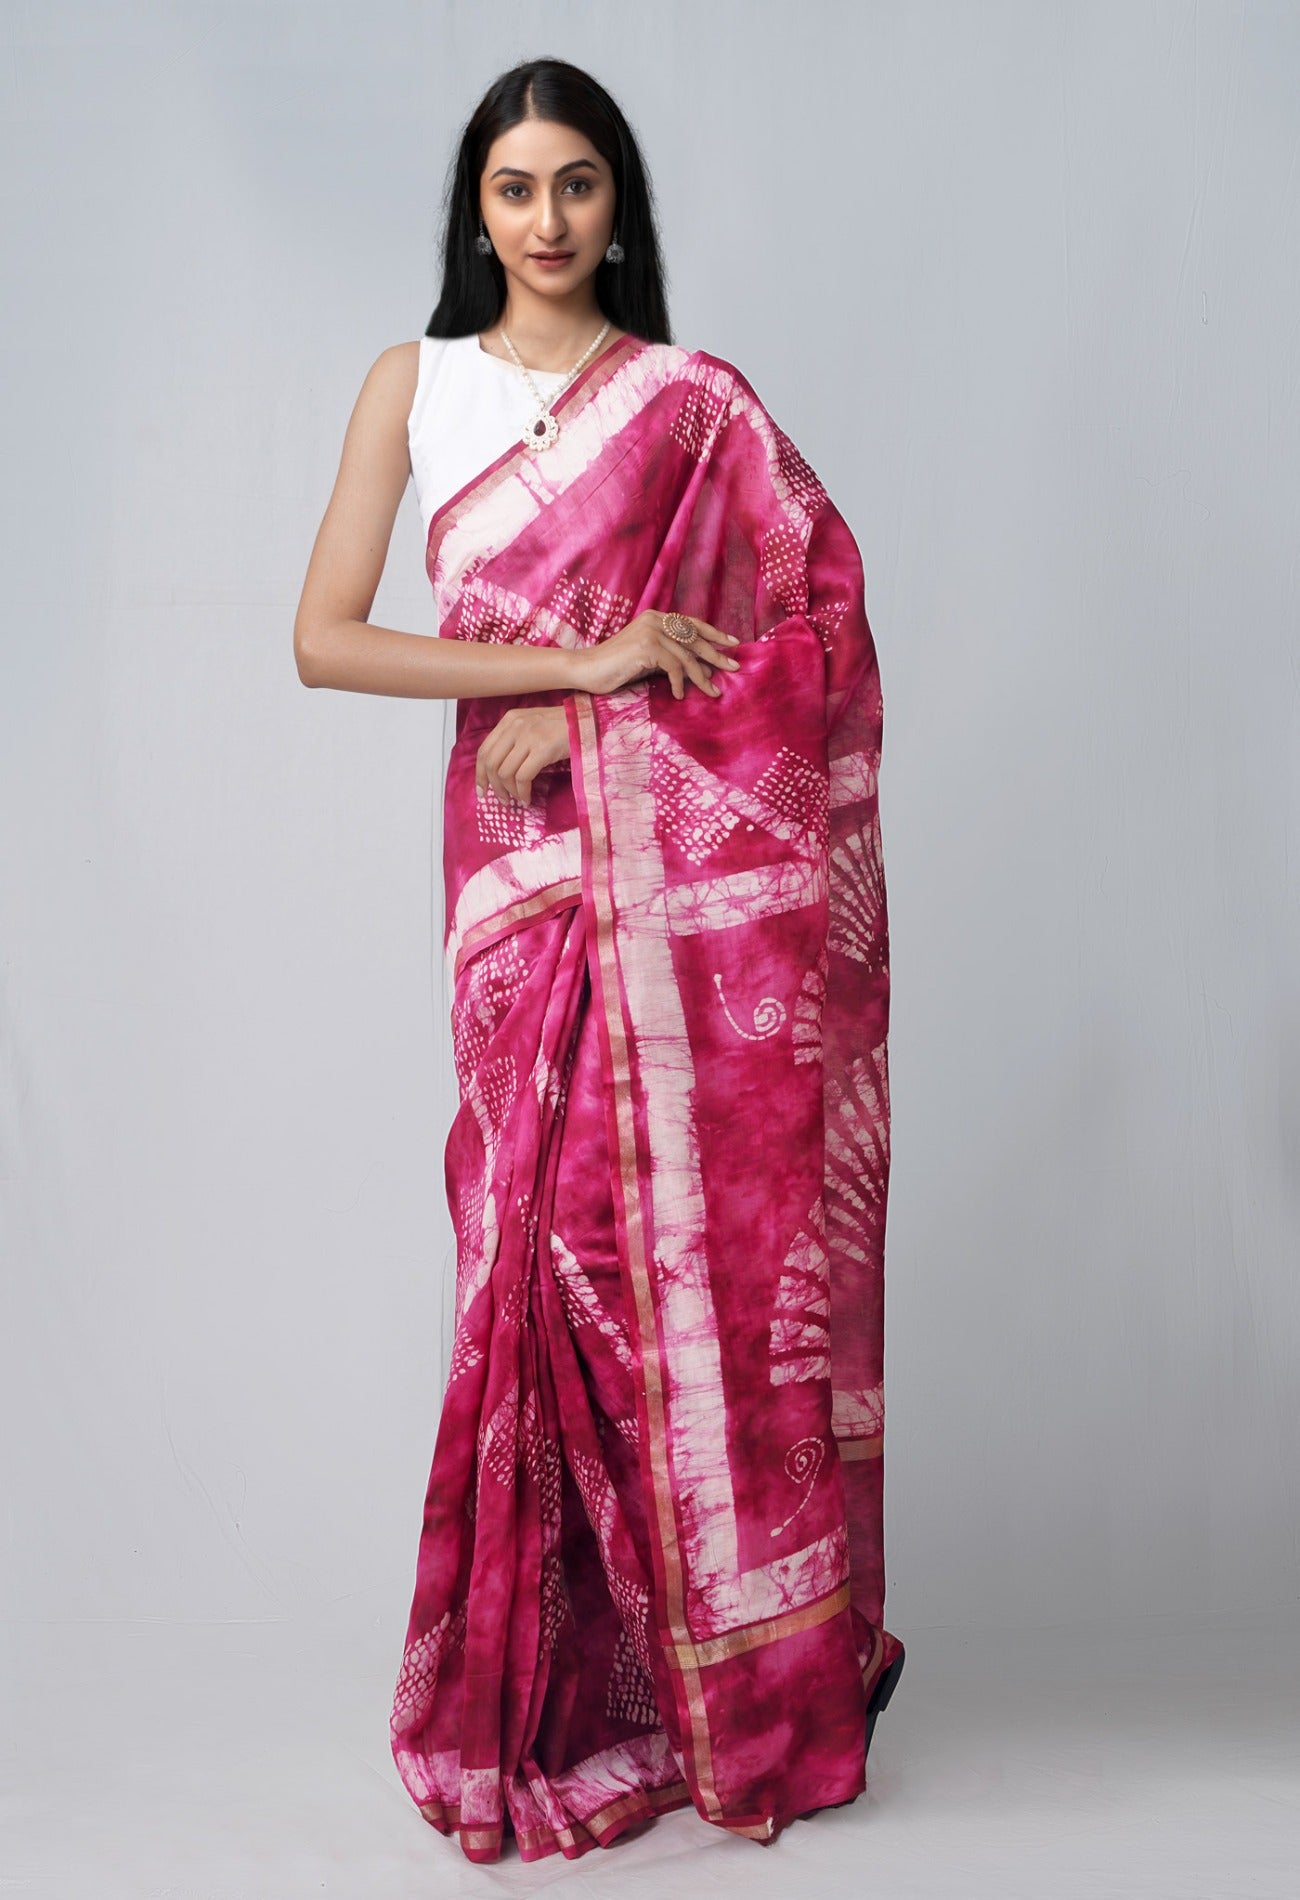 Online Shopping for Pink Pure Fusion Batik Chanderi Sico Saree with Fancy/Ethnic Prints from Rajasthan at Unnatisilks.com India
